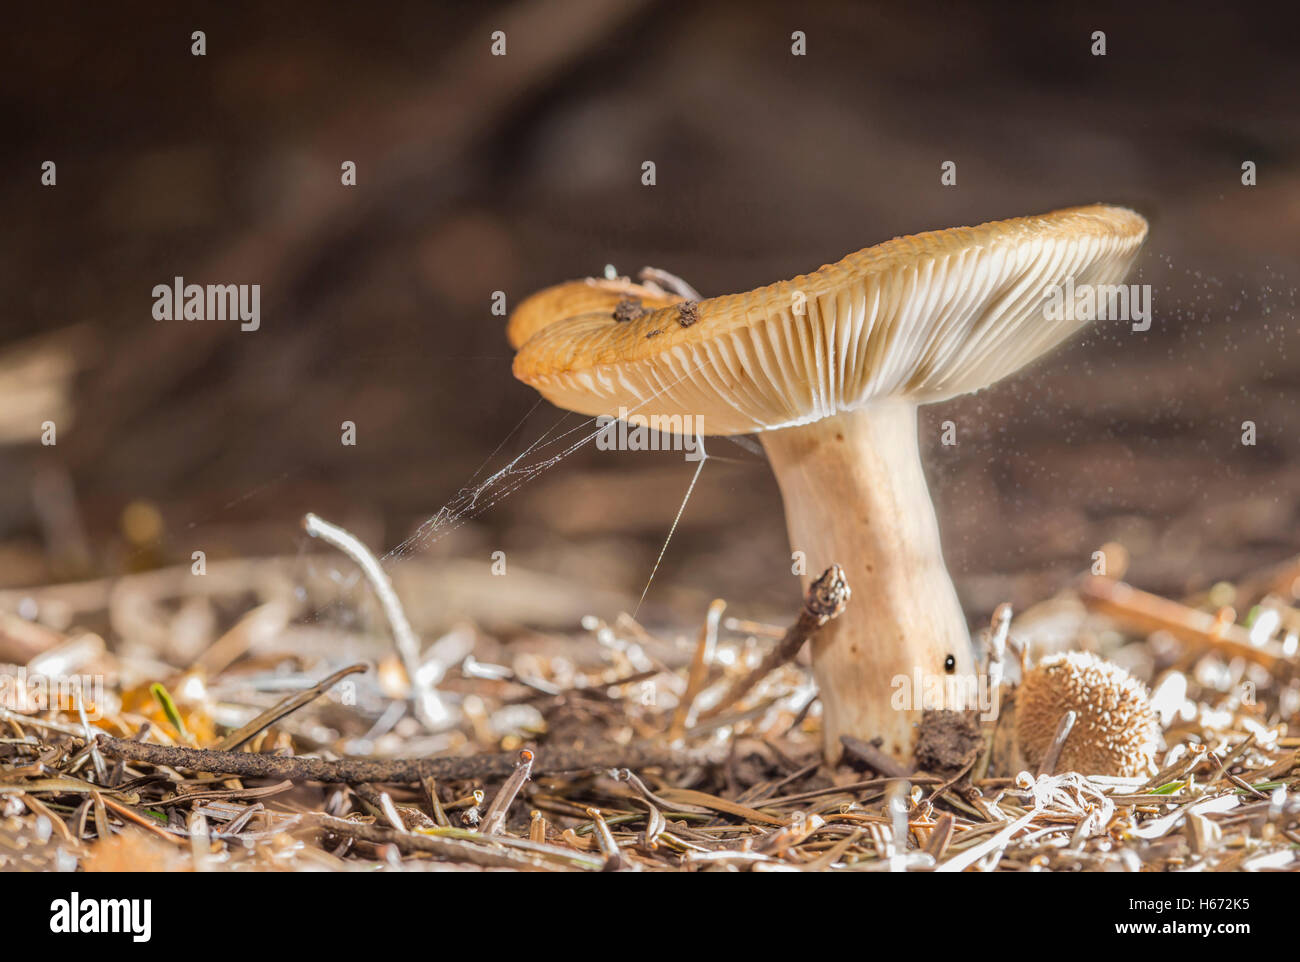 Small mushroom with flying spore around in the air. Stock Photo